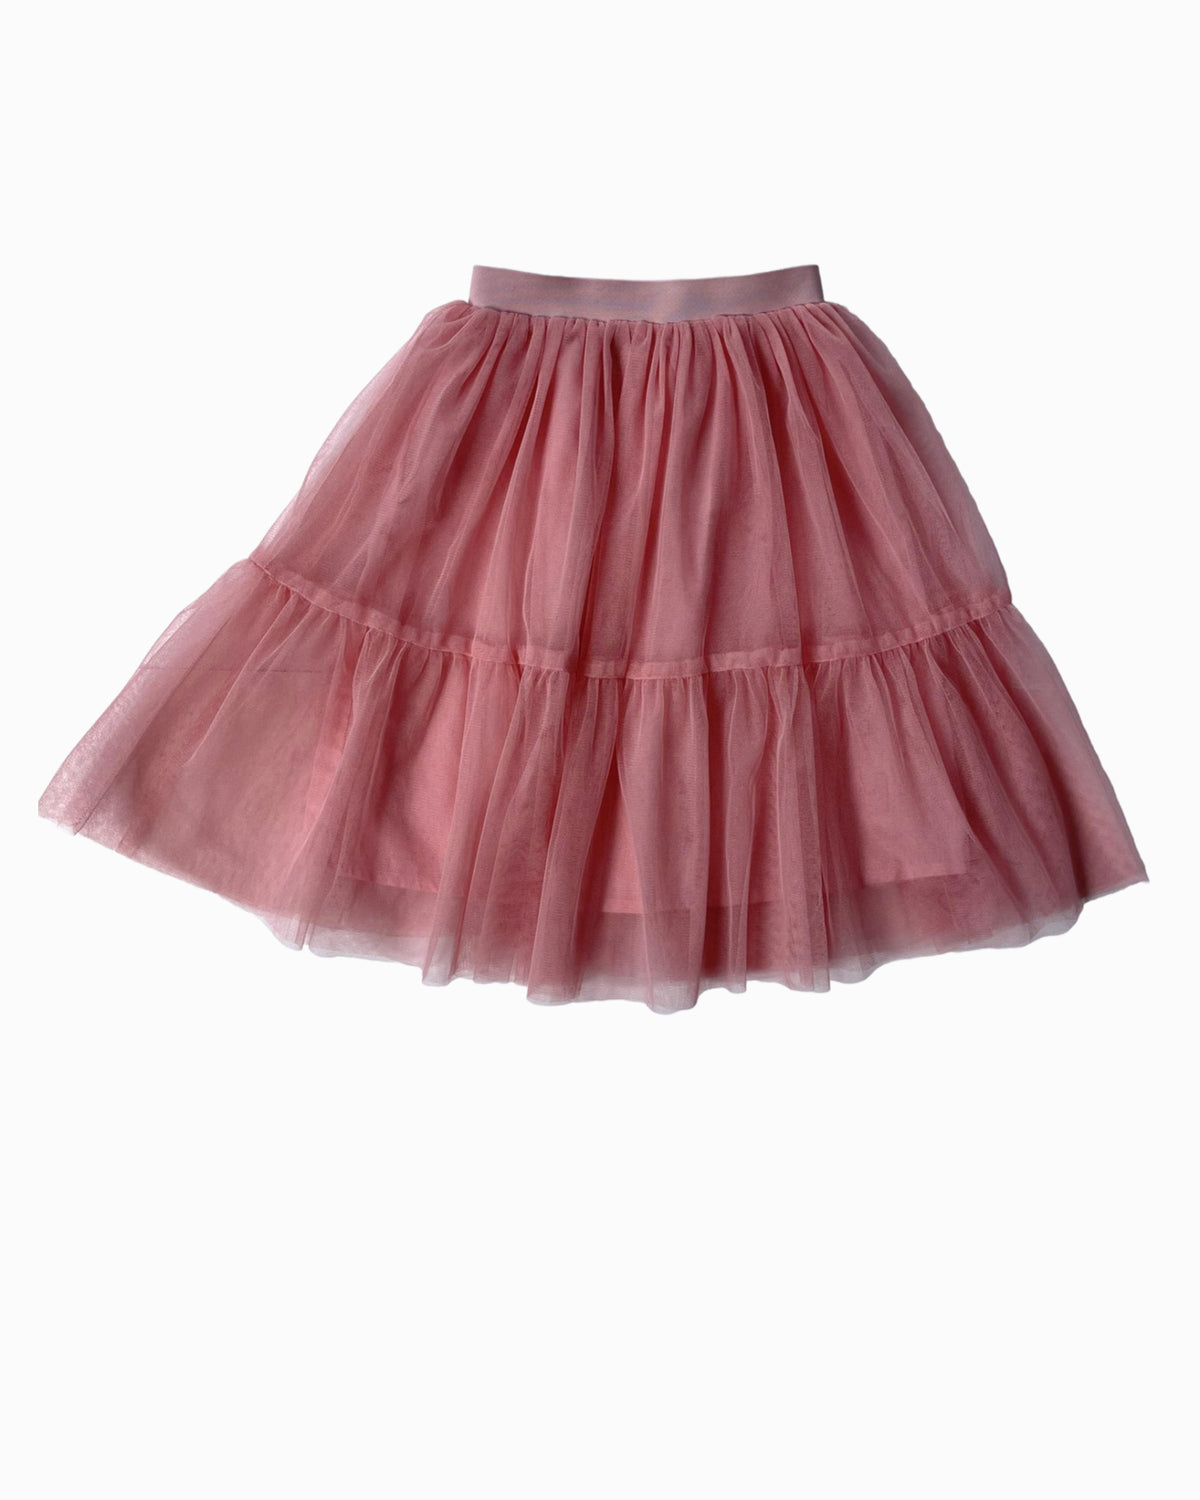 Tiered Tulle Long Skirt in Dusty Pink